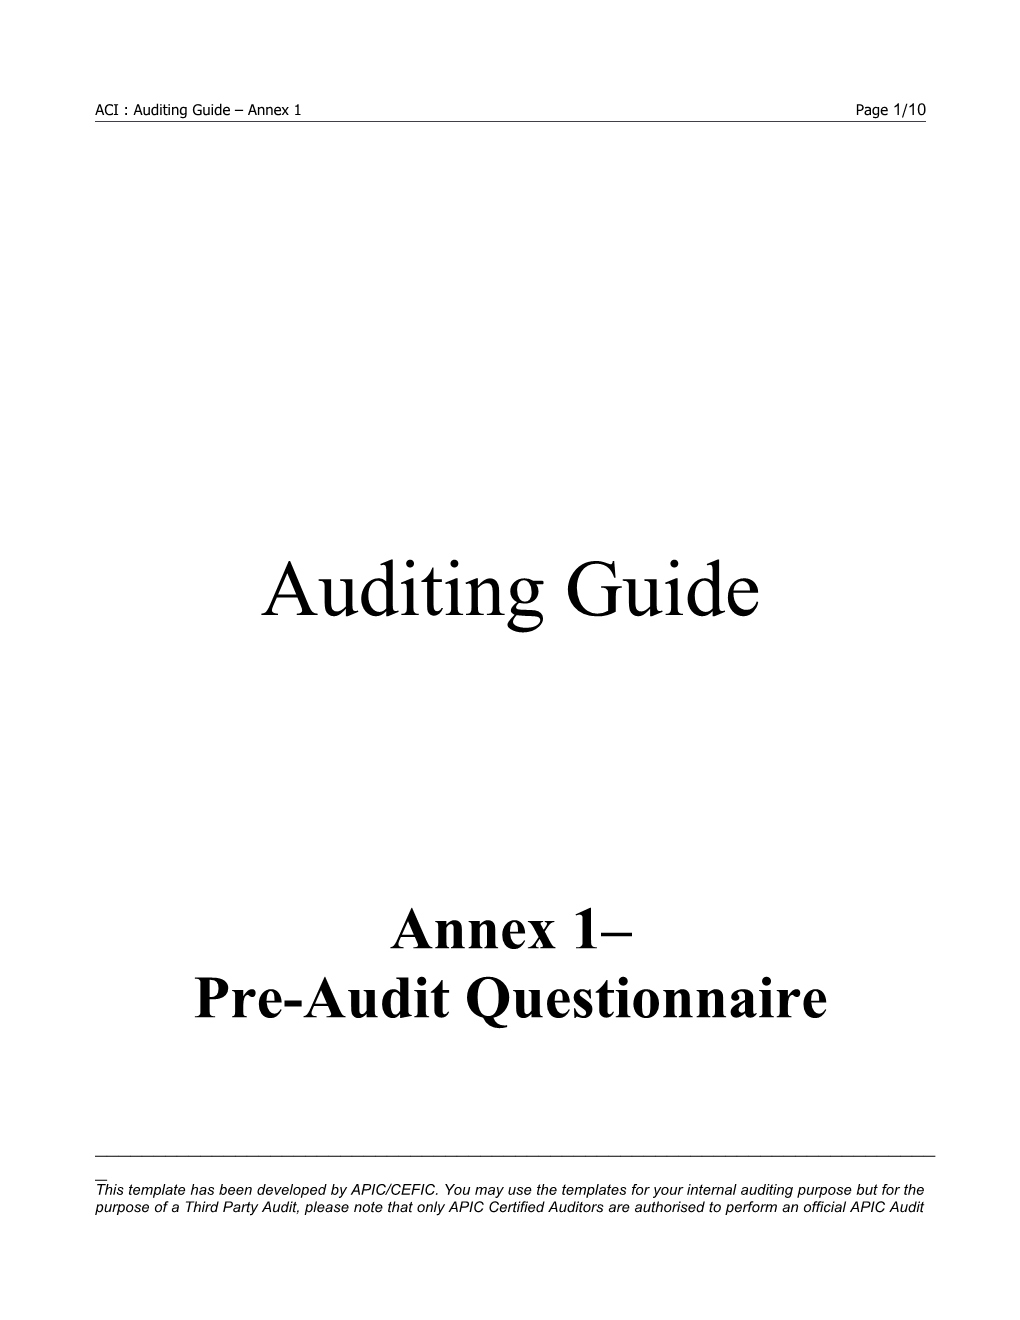 ACI : Auditing Guide Annex 1 Page 1/9